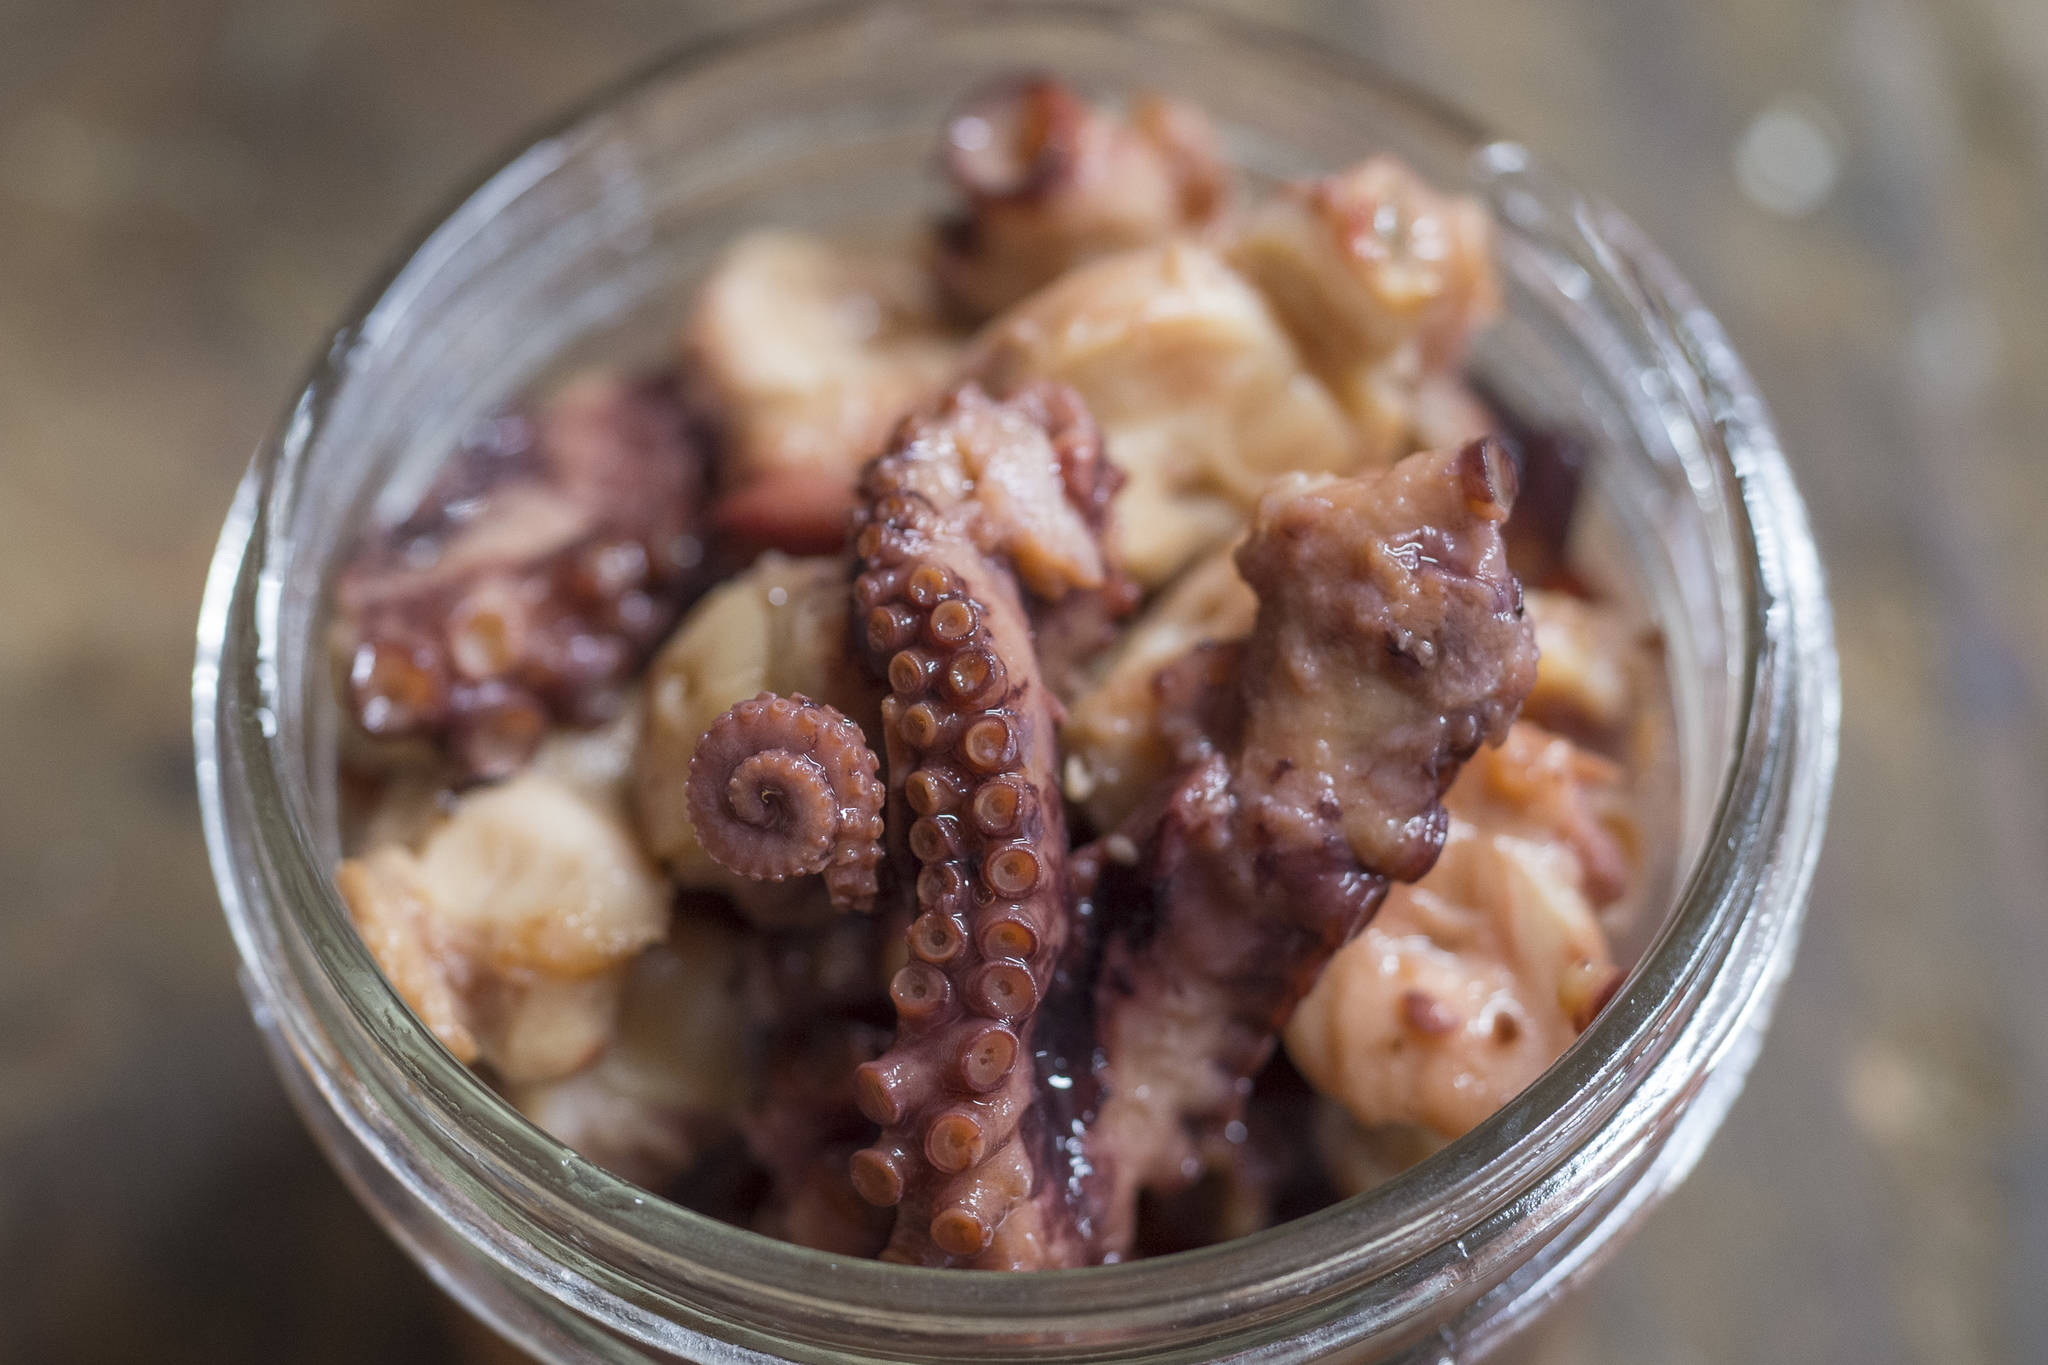 Rik Pruett said it has been a dream come true to bring his smoked octopus to market. (Michael Penn | Juneau Empire)